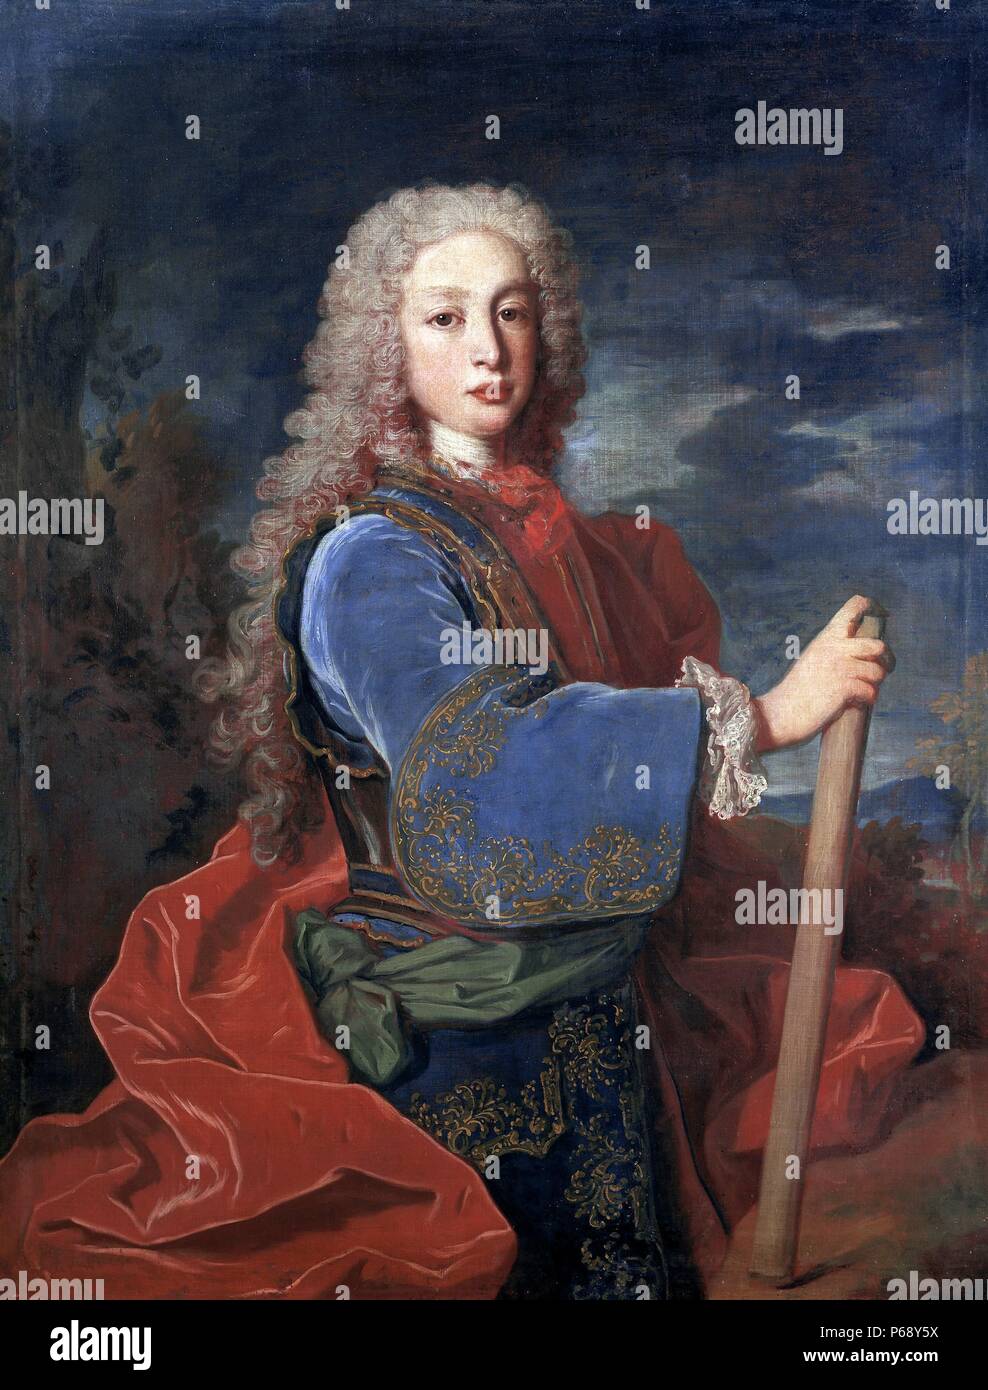 Portrait of Louis I of Spain (Luis I de Bourbon) (1707-1724) King of Spain. Painted by Jean Ranc (1674-1735). Dated 18th Century Stock Photo